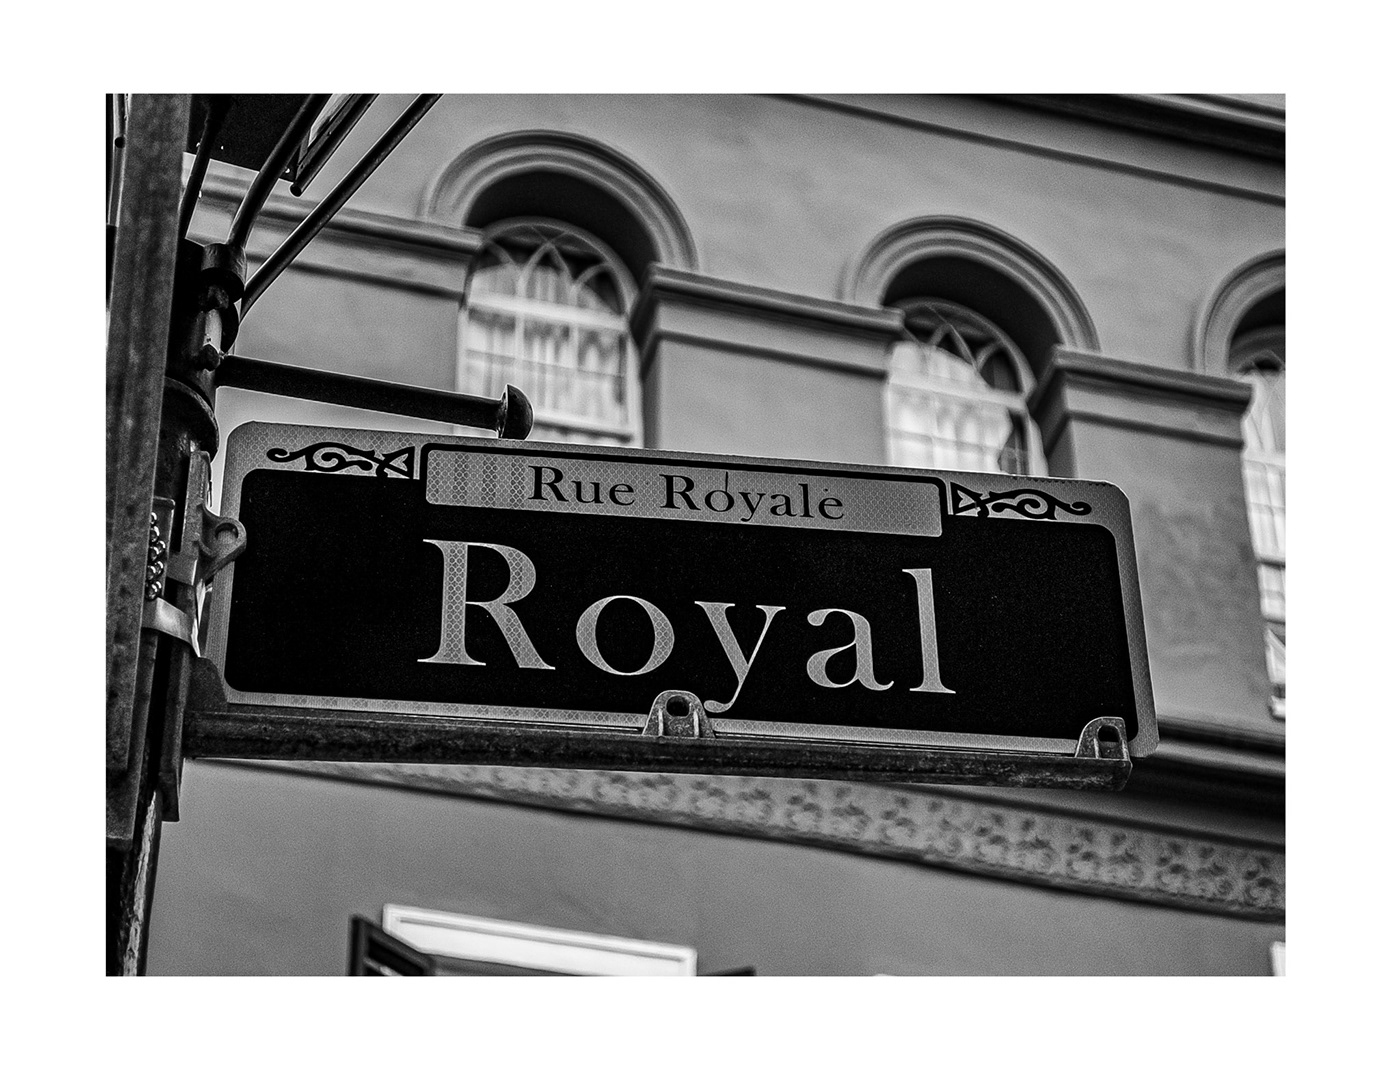 The street sign for Royal Street in New Orleans